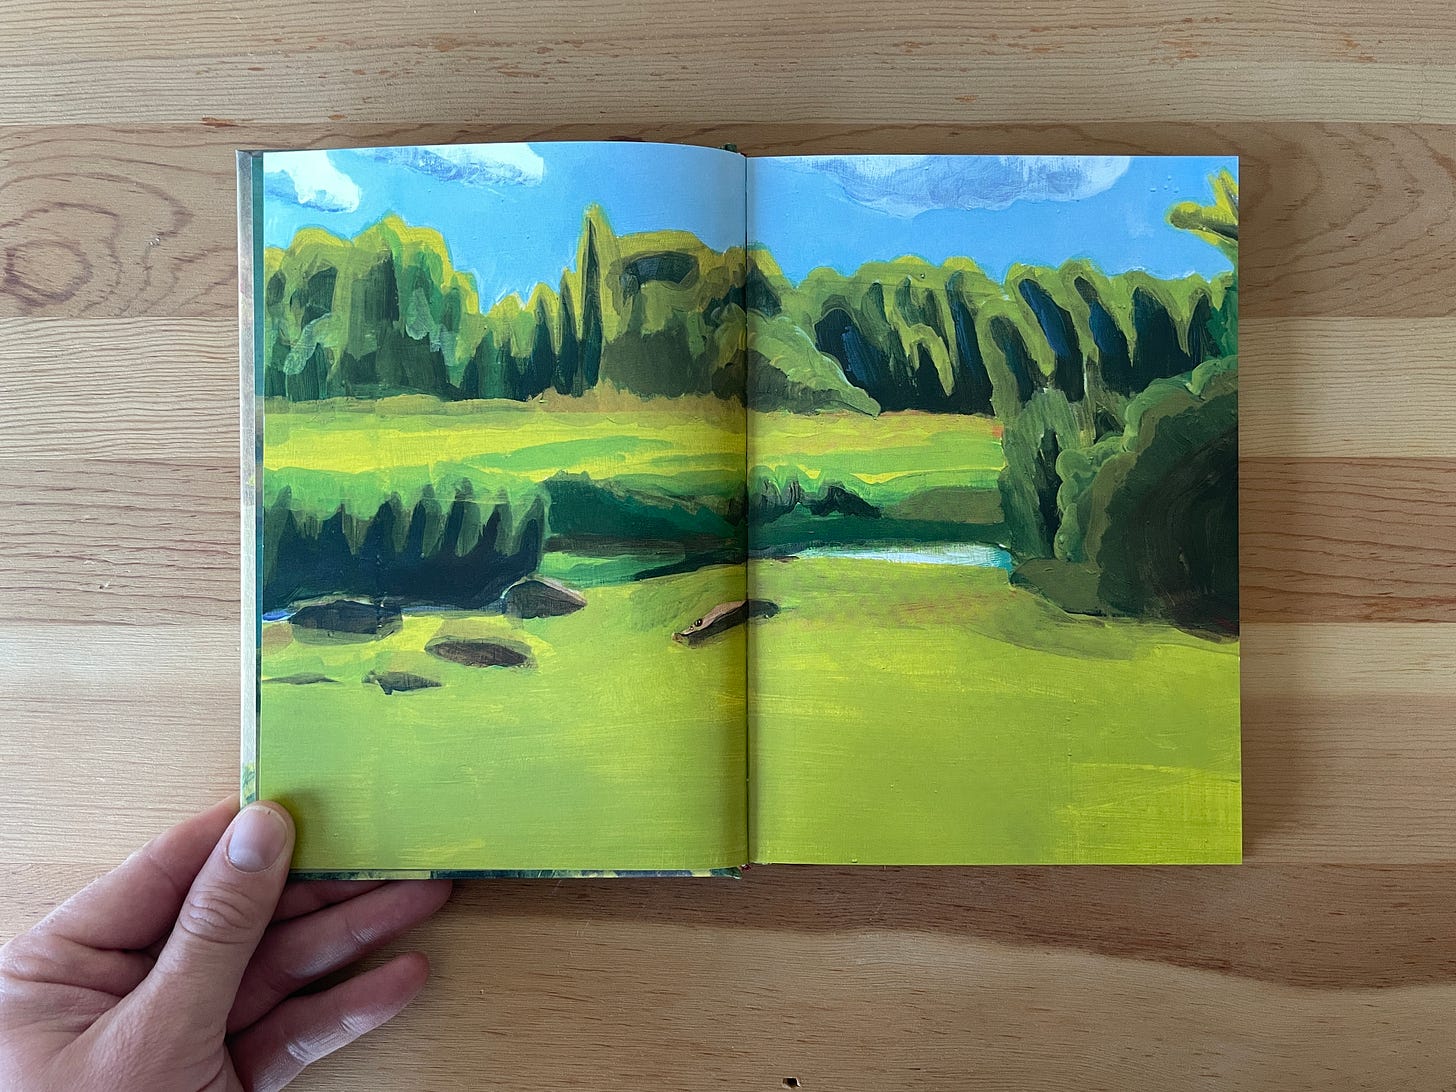 A book laid open to a painting of a stream.